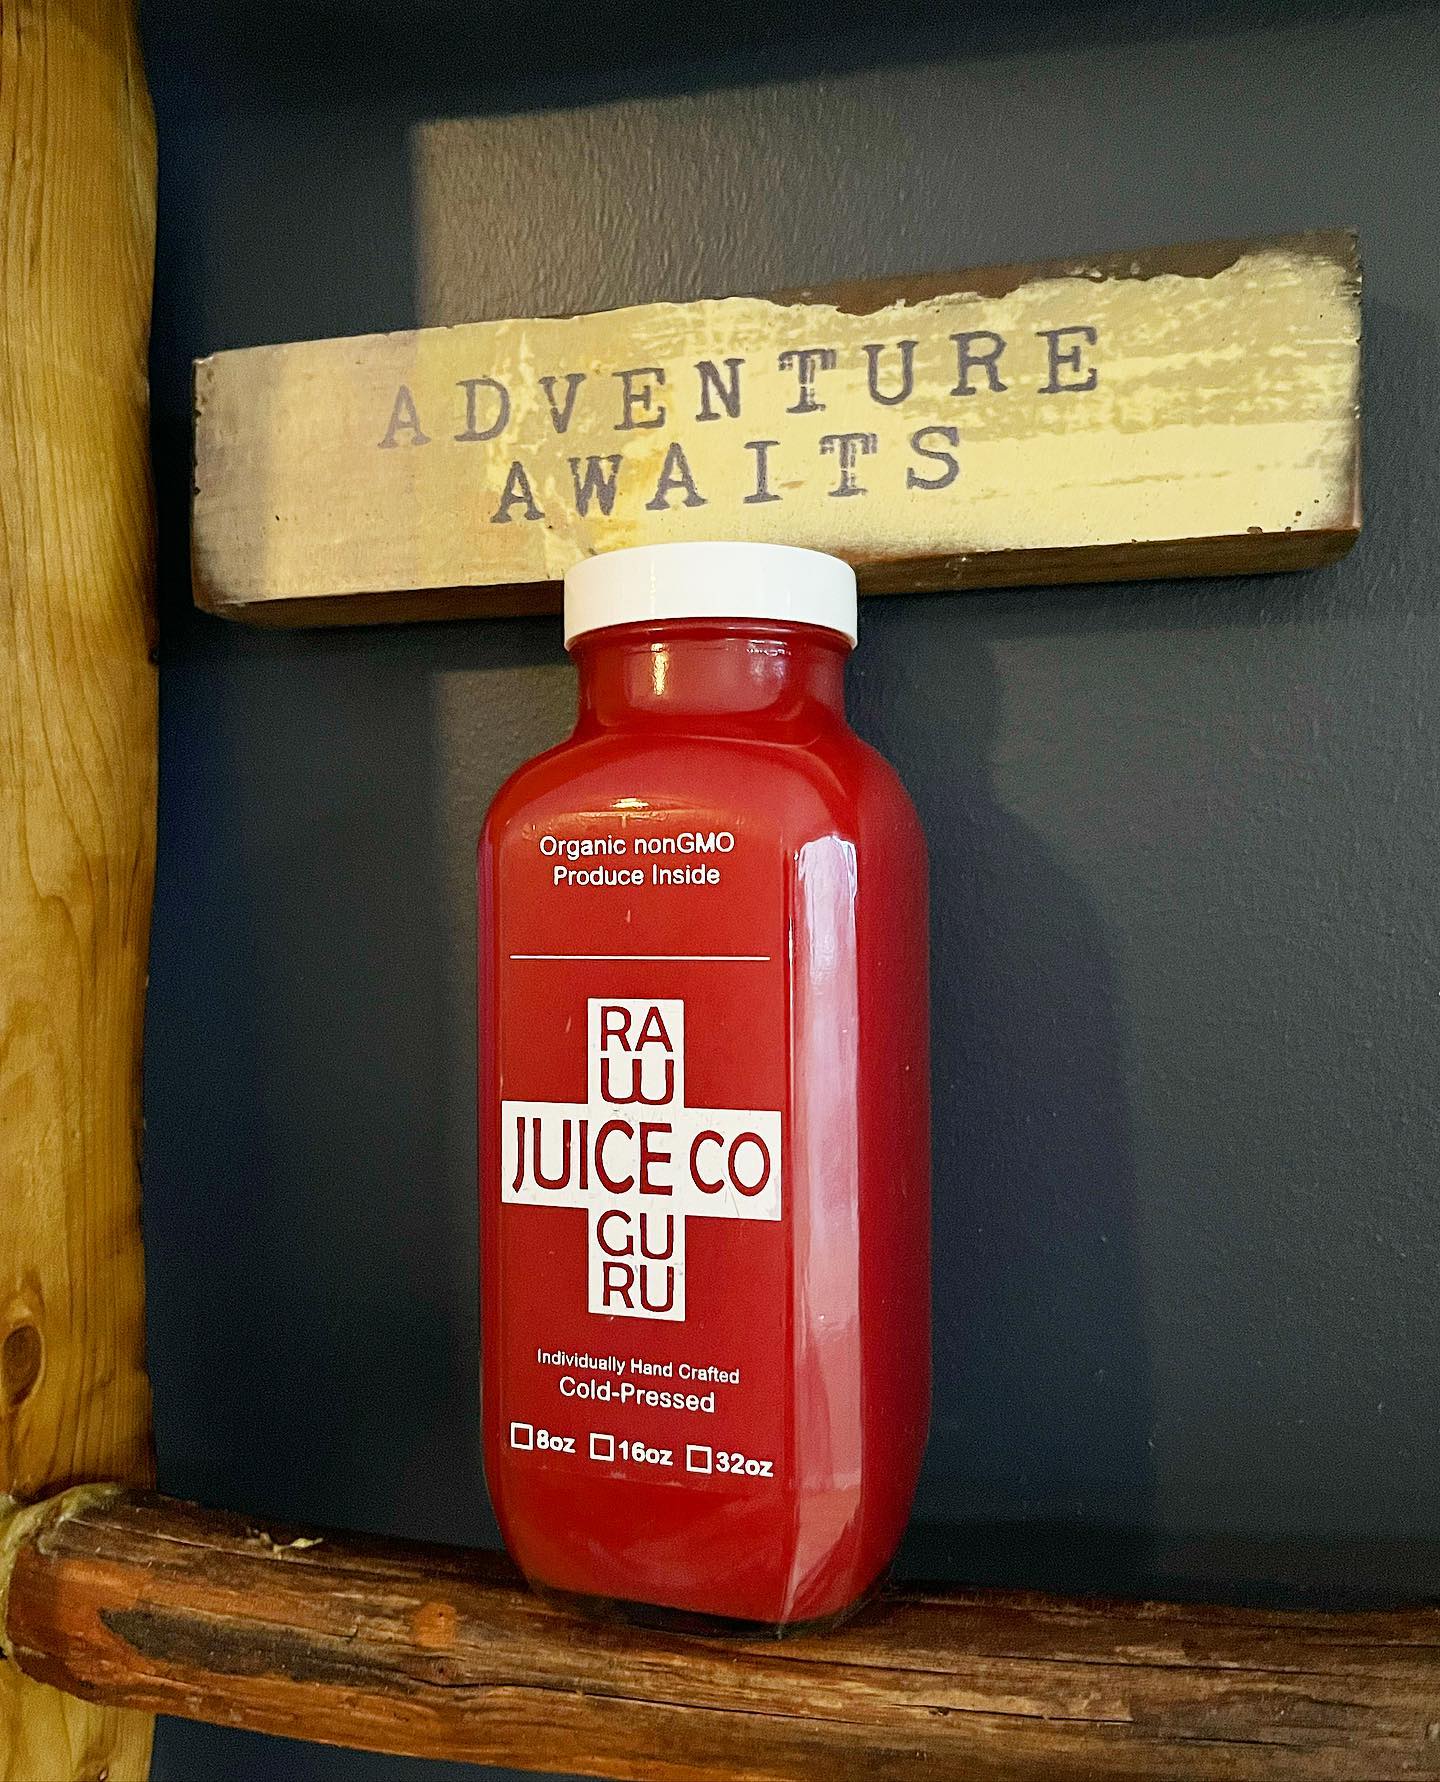 What’s your next adventure? 

Watermelon raw juice wants to go for the ride with you. 

Hydrate your cells.

.
.
.
.
.
.
#adventure #adventuretime #watermelon #watermelon🍉